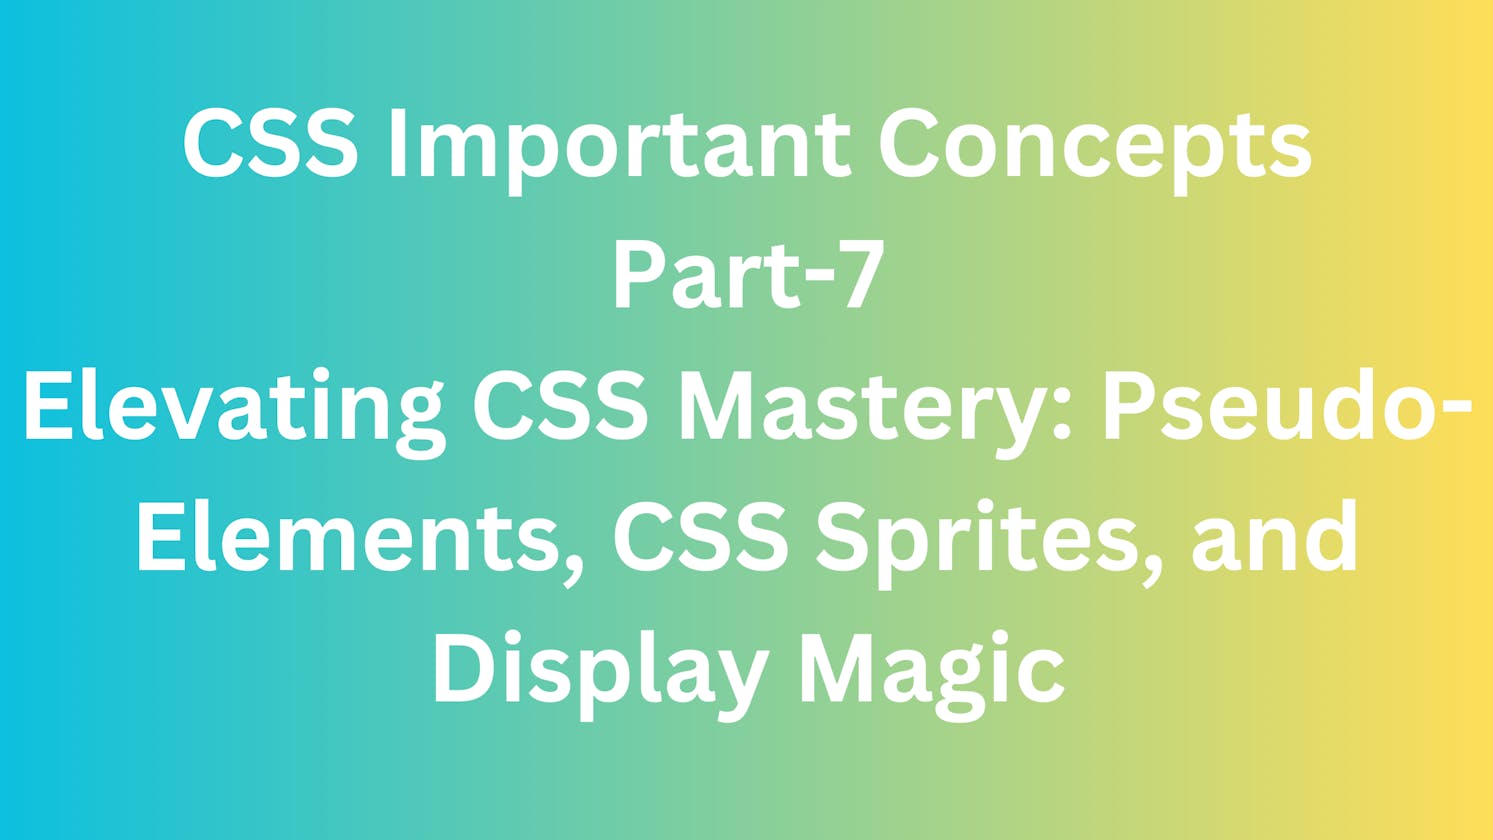 Elevating CSS Mastery: Pseudo-Elements, CSS Sprites, and Display Magic